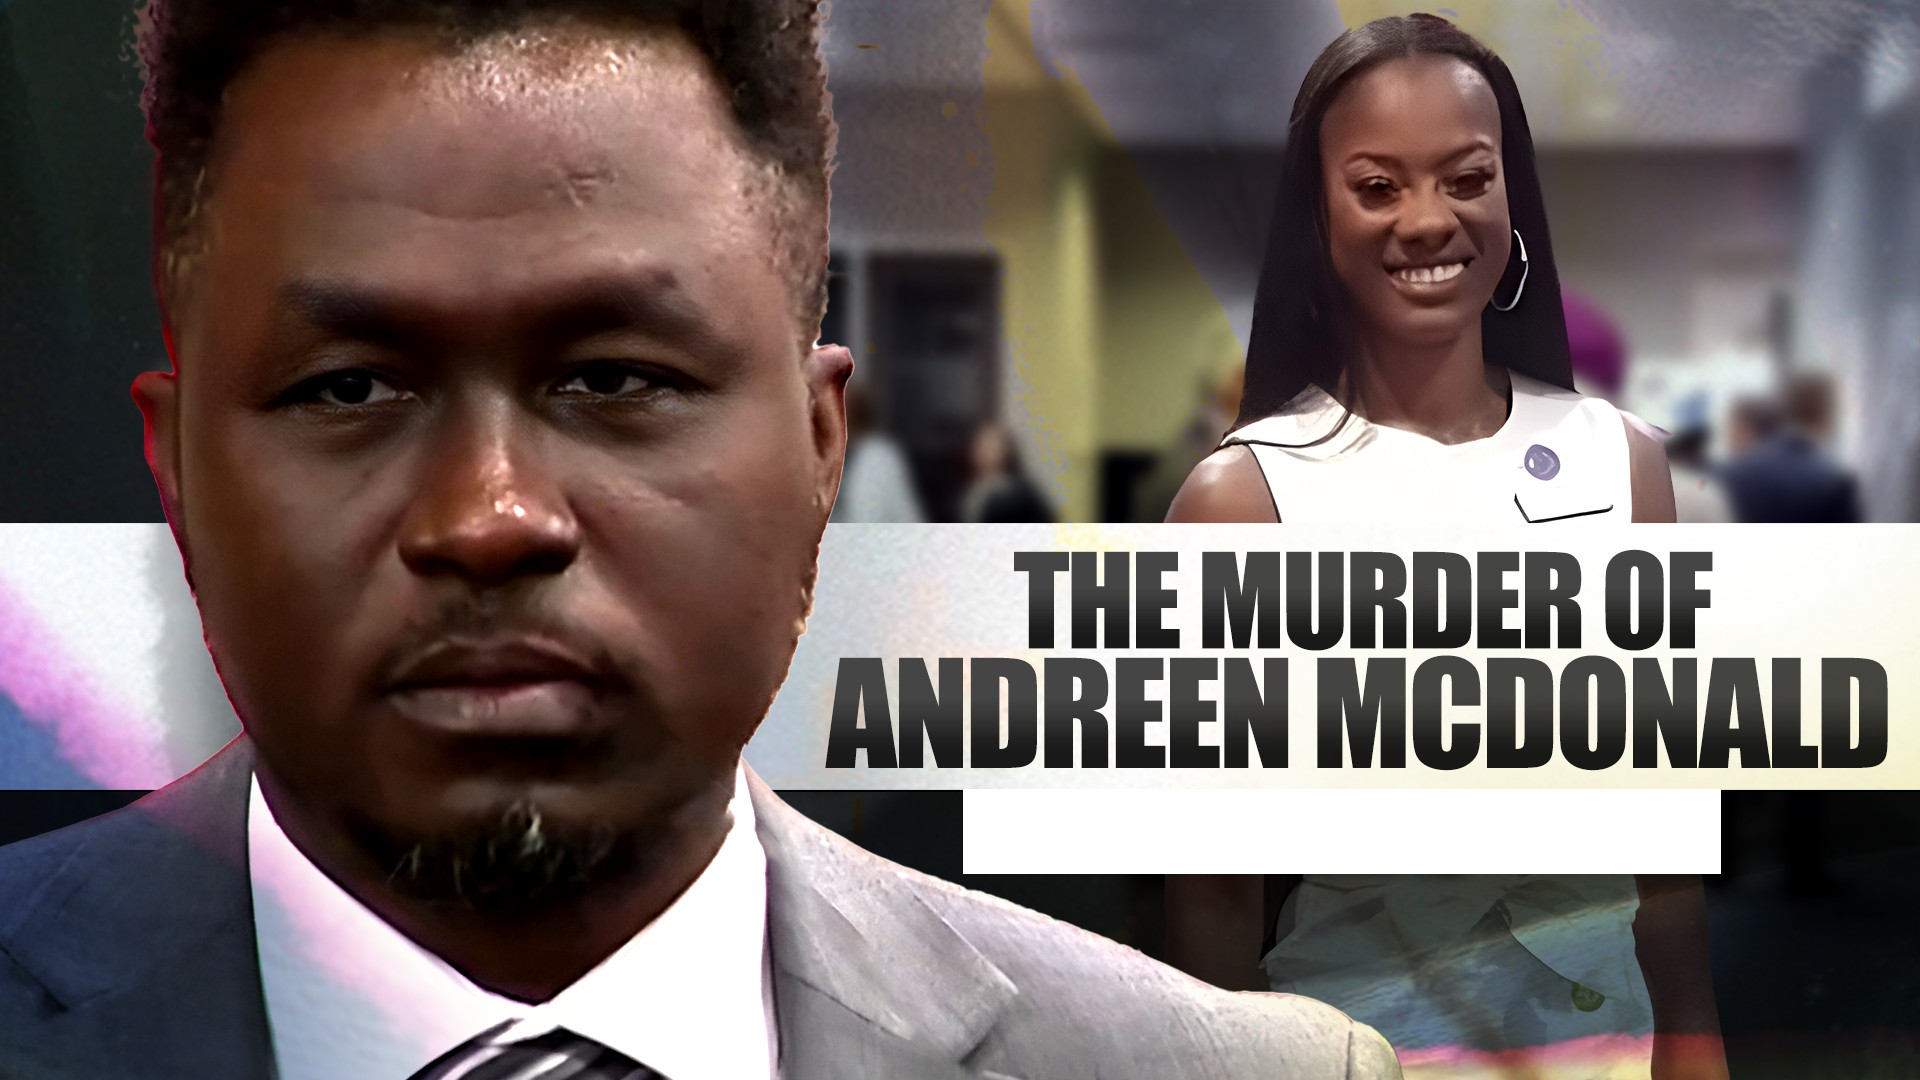 Why Did Andre McDonald Kill His Wife, Andreen?